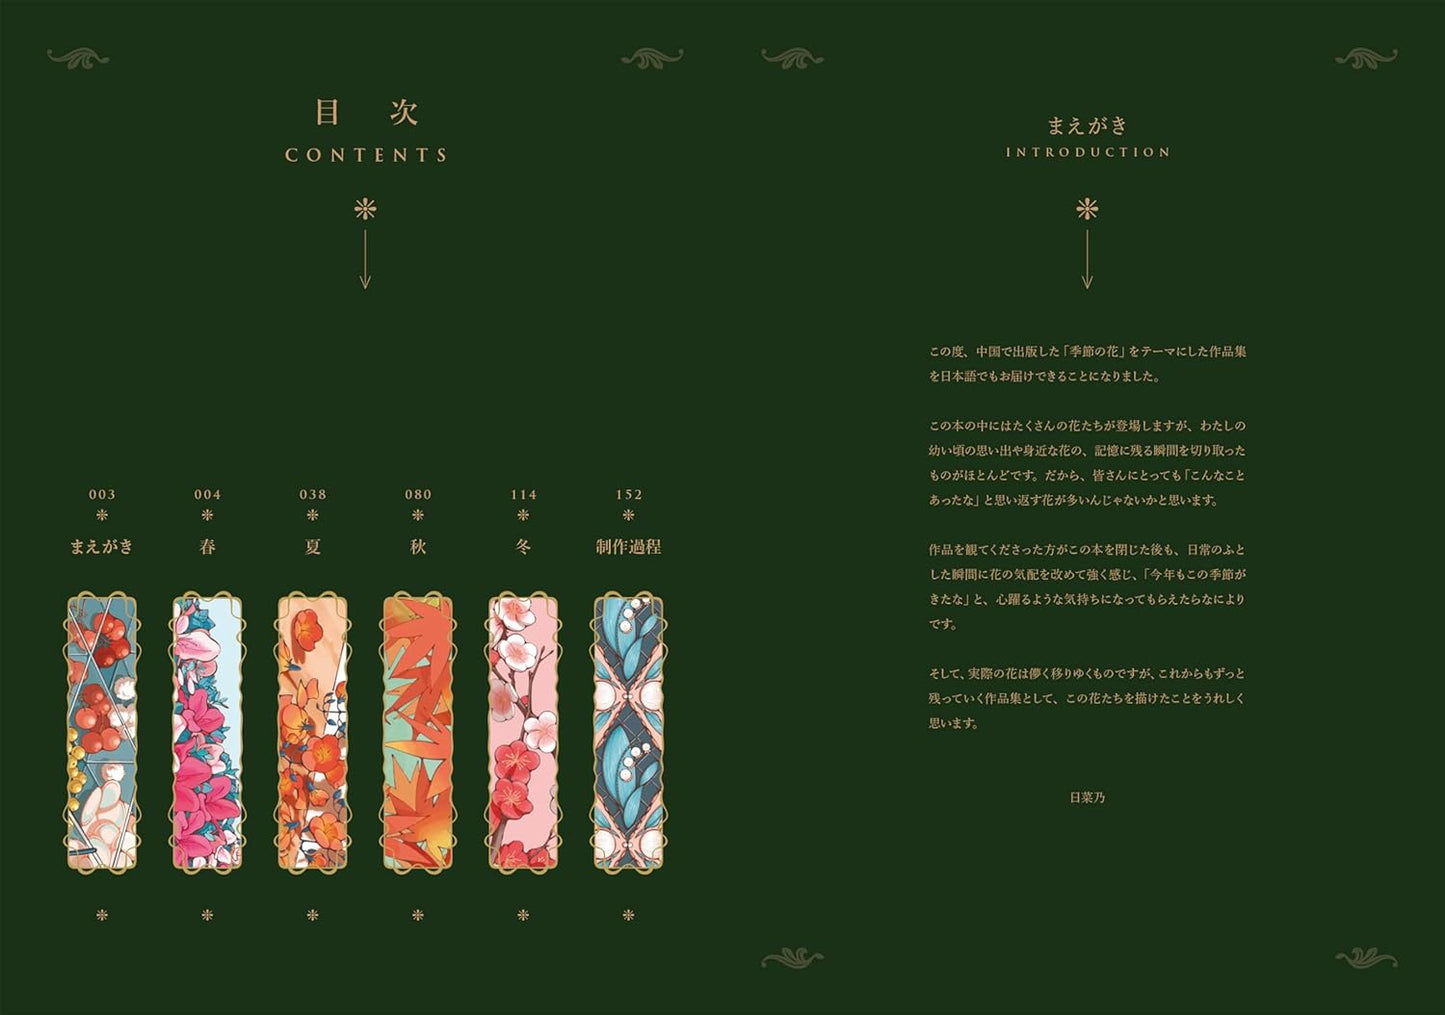 Hinano Art Book "Meet With The Fragrance of All Seasons"